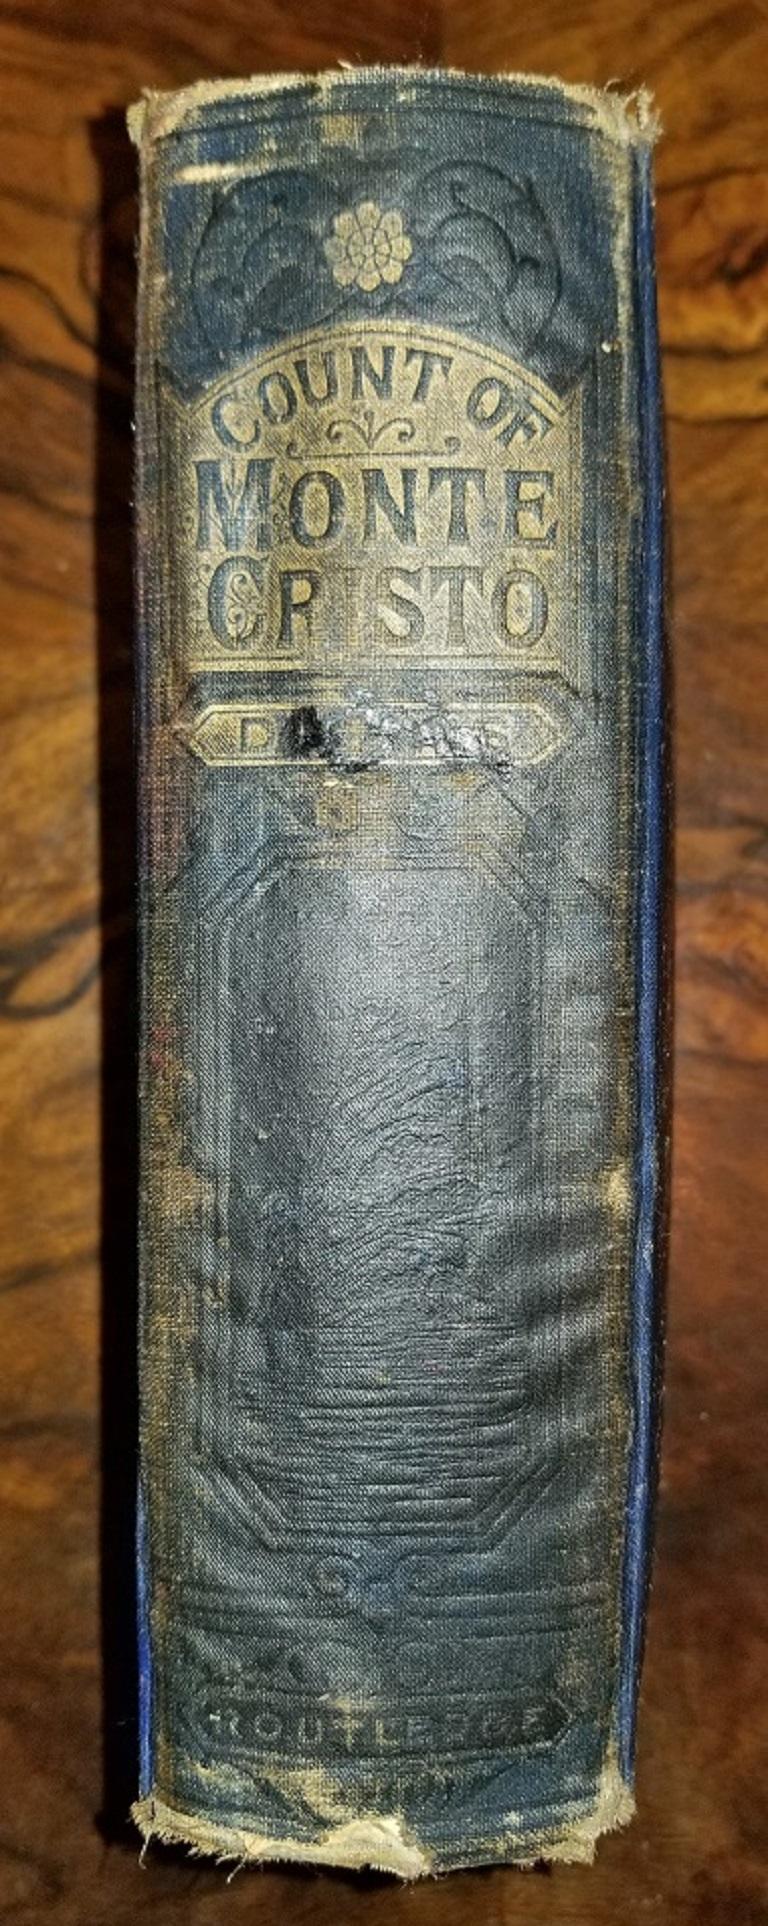 Paper The Count of Monte Cristo by Dumas, 1879